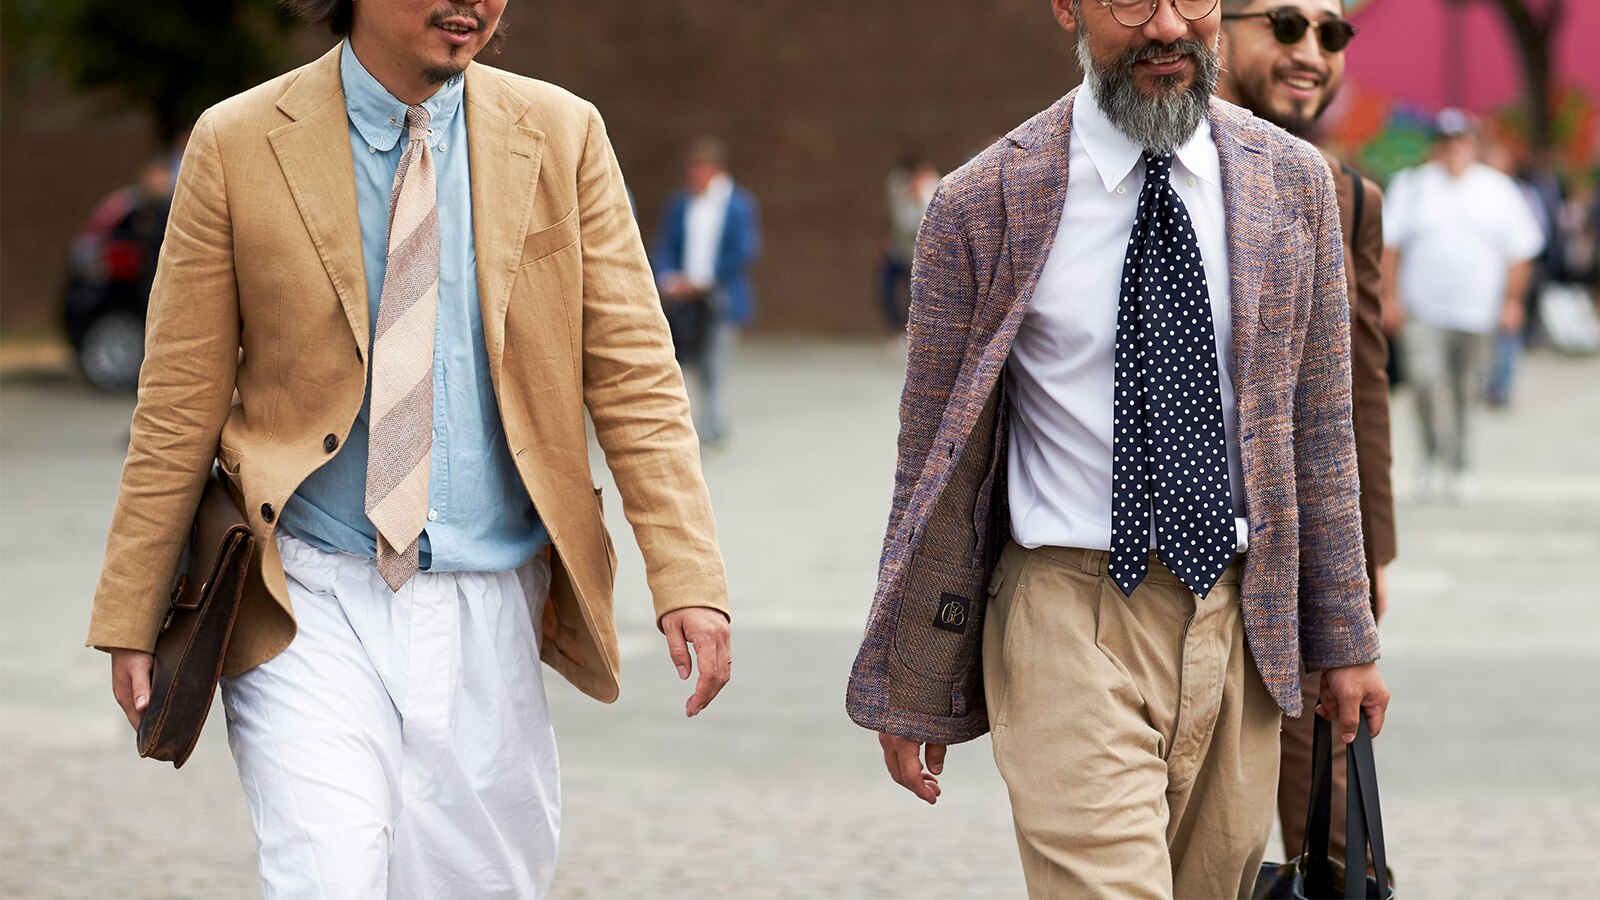 Fashion: How To Look Good In Chinos | The Journal | MR PORTER